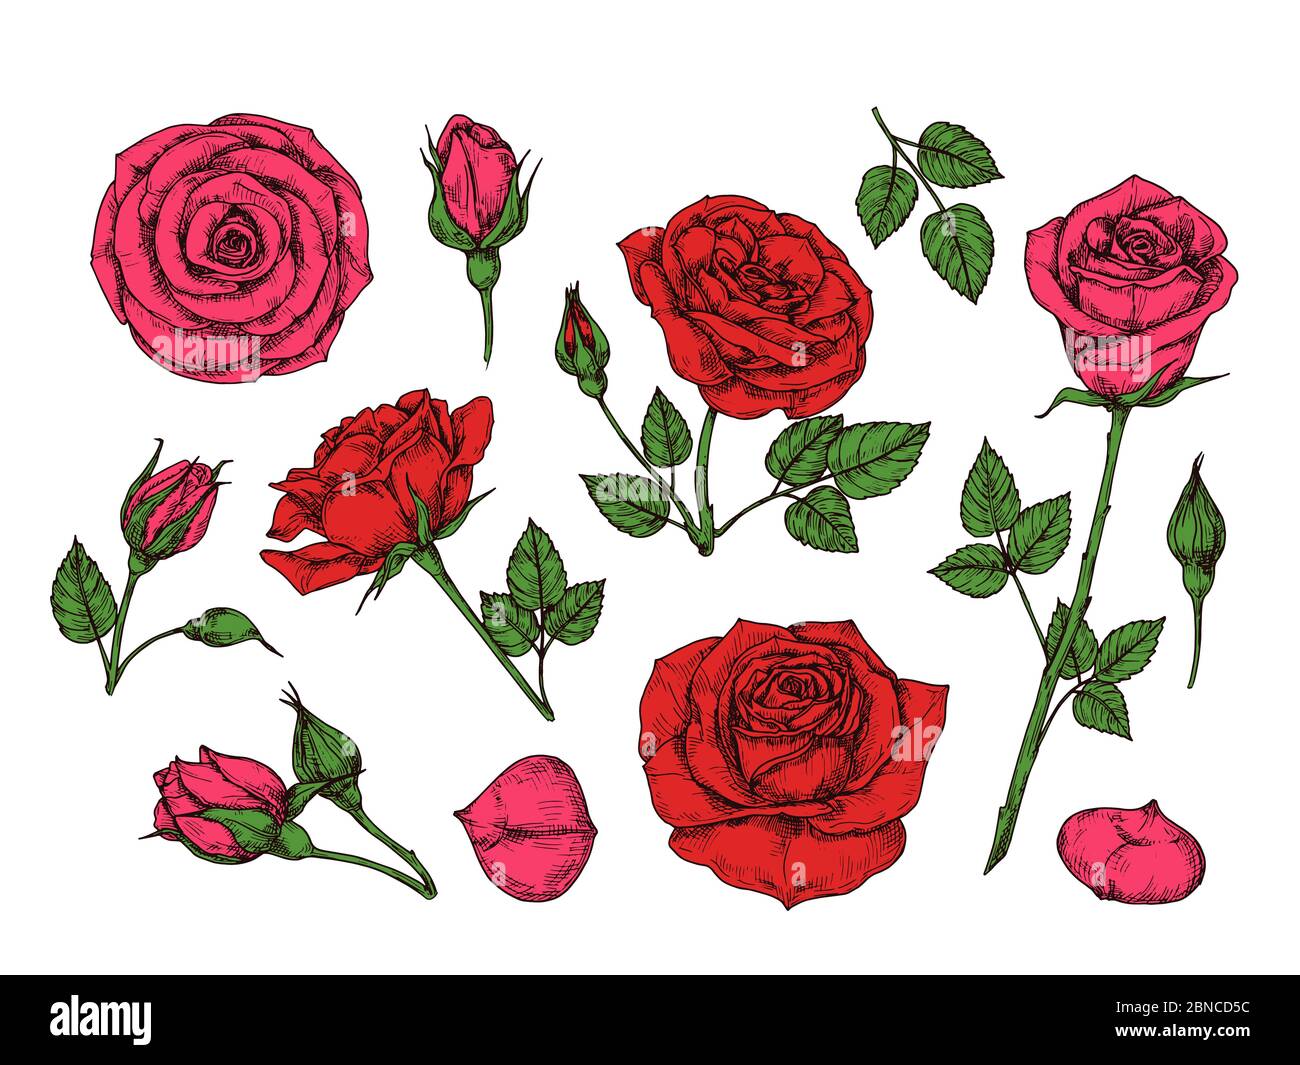 Red rose. Hand drawn roses garden flowers with green leaves, buds and thorns. Cartoon vector isolated collection. Red rose petal, floral flower romantic illustration Stock Vector